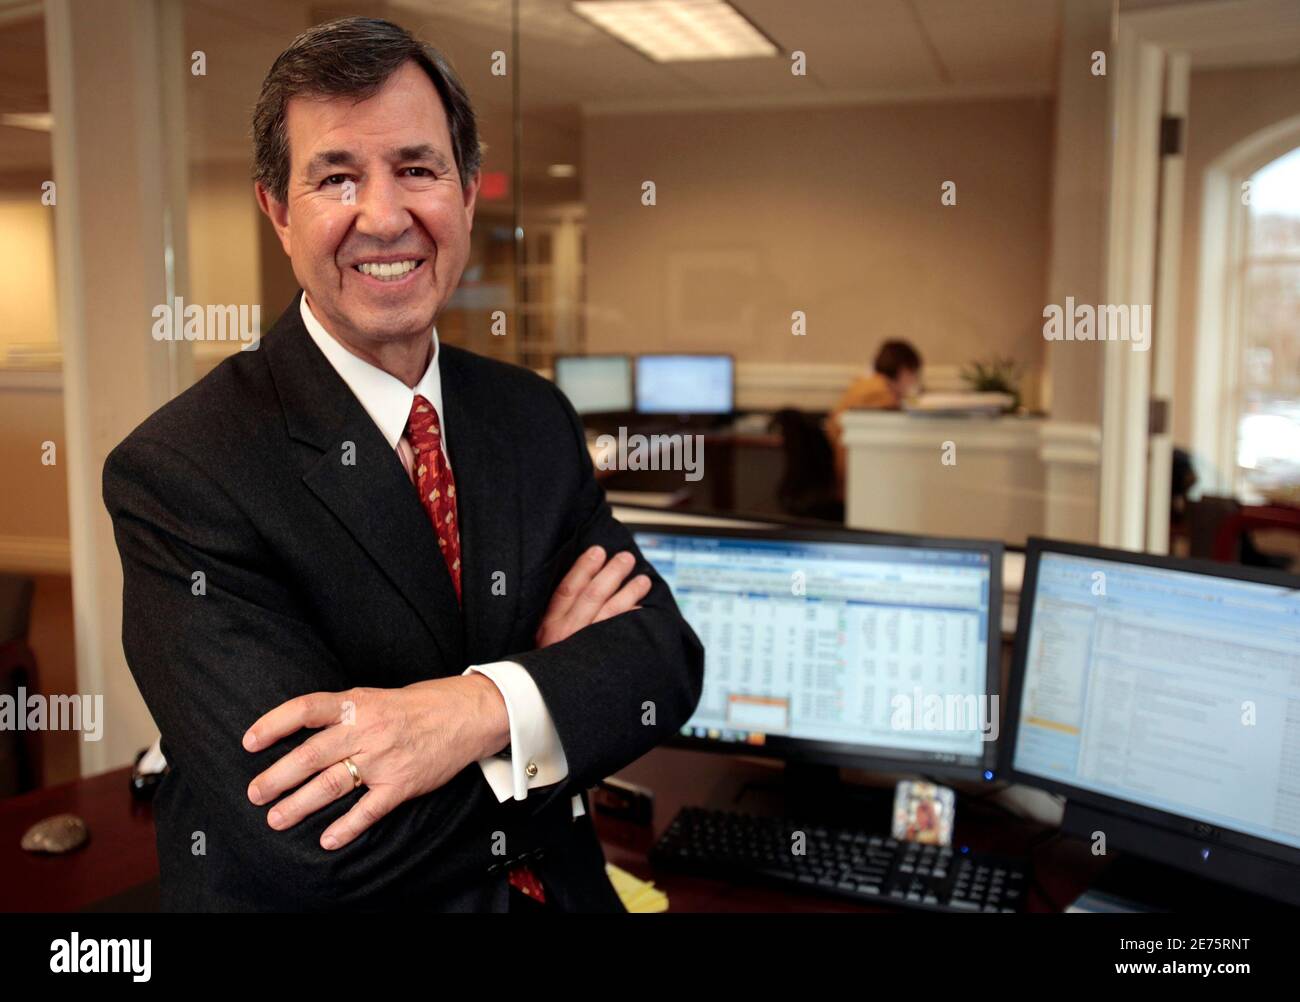 Pointe Capital Management LLC managing member Chuck Huebner poses in his  new office at Grosse Pointe Farms, Michigan March 23, 2010. Between  November 2008 and last month, some 1,500 brokers fled 